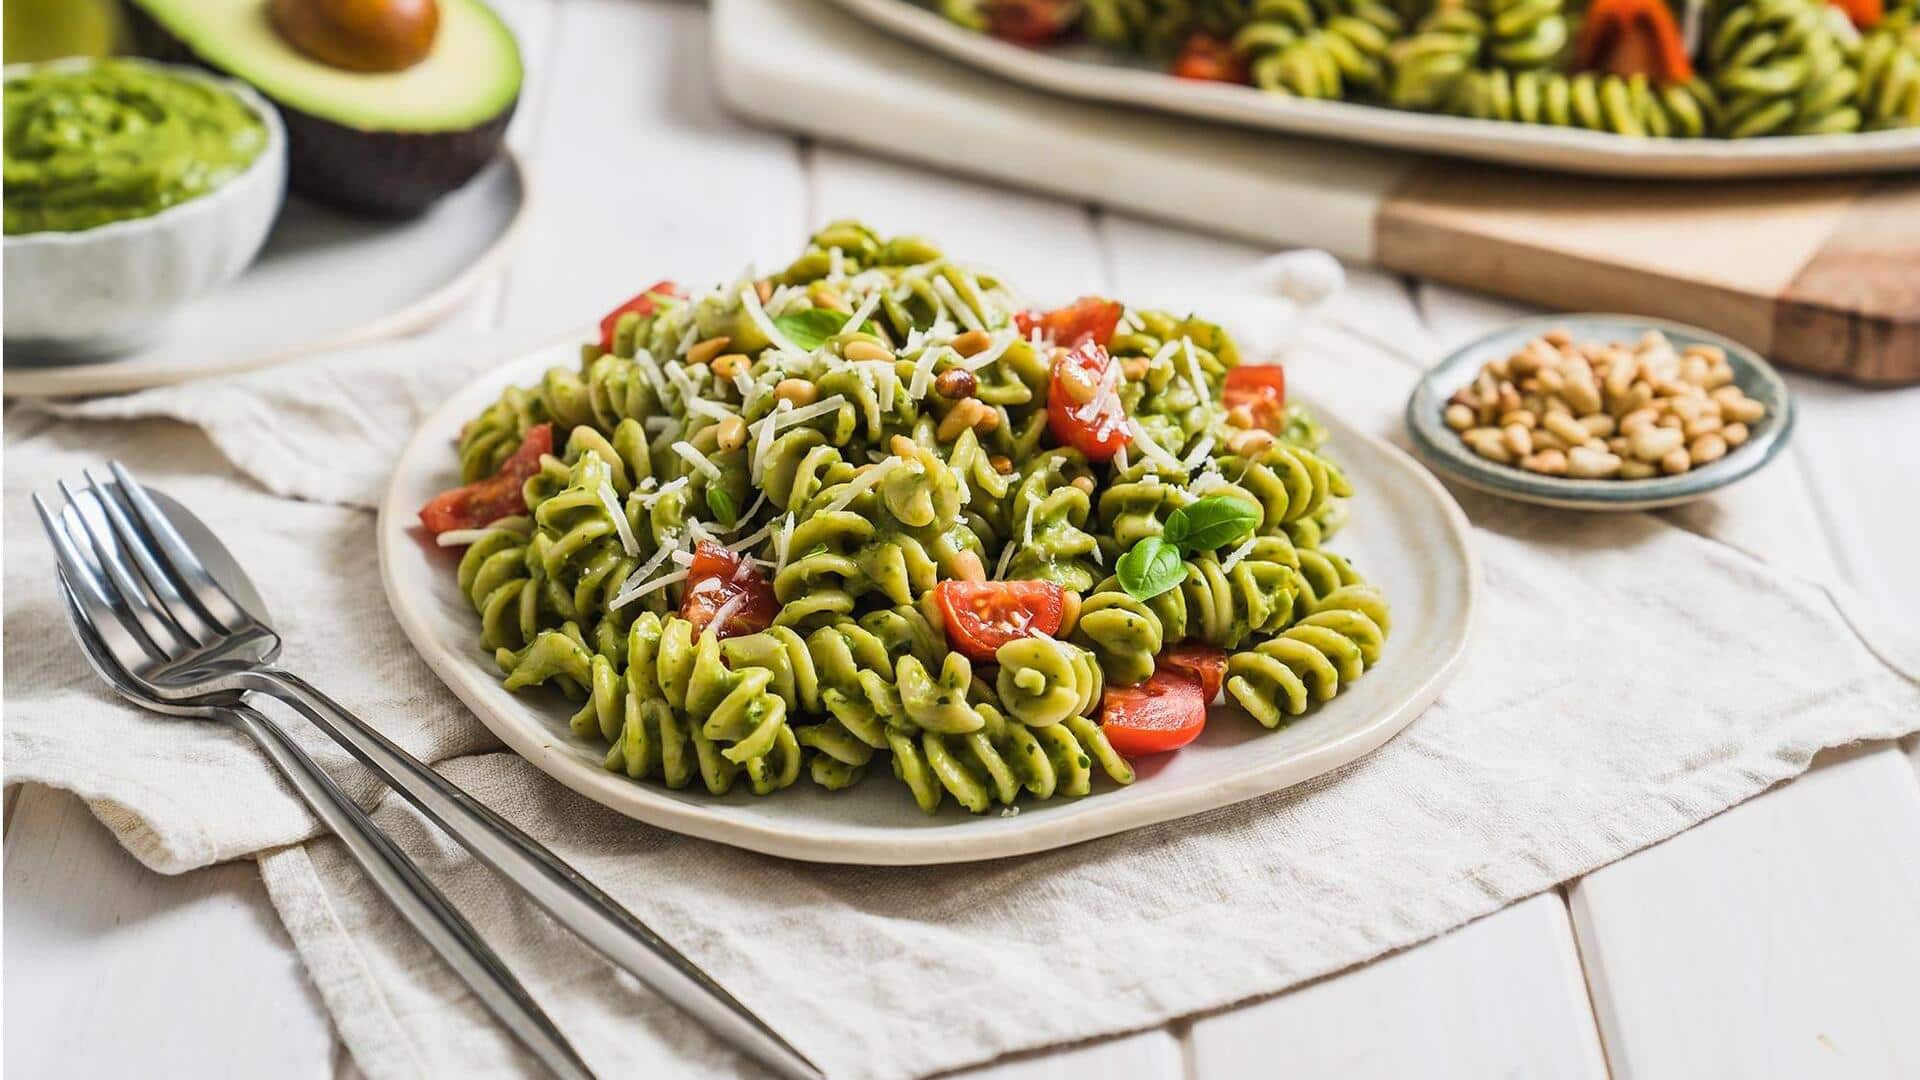 Try this creamy avocado pasta recipe for a flavorsome day